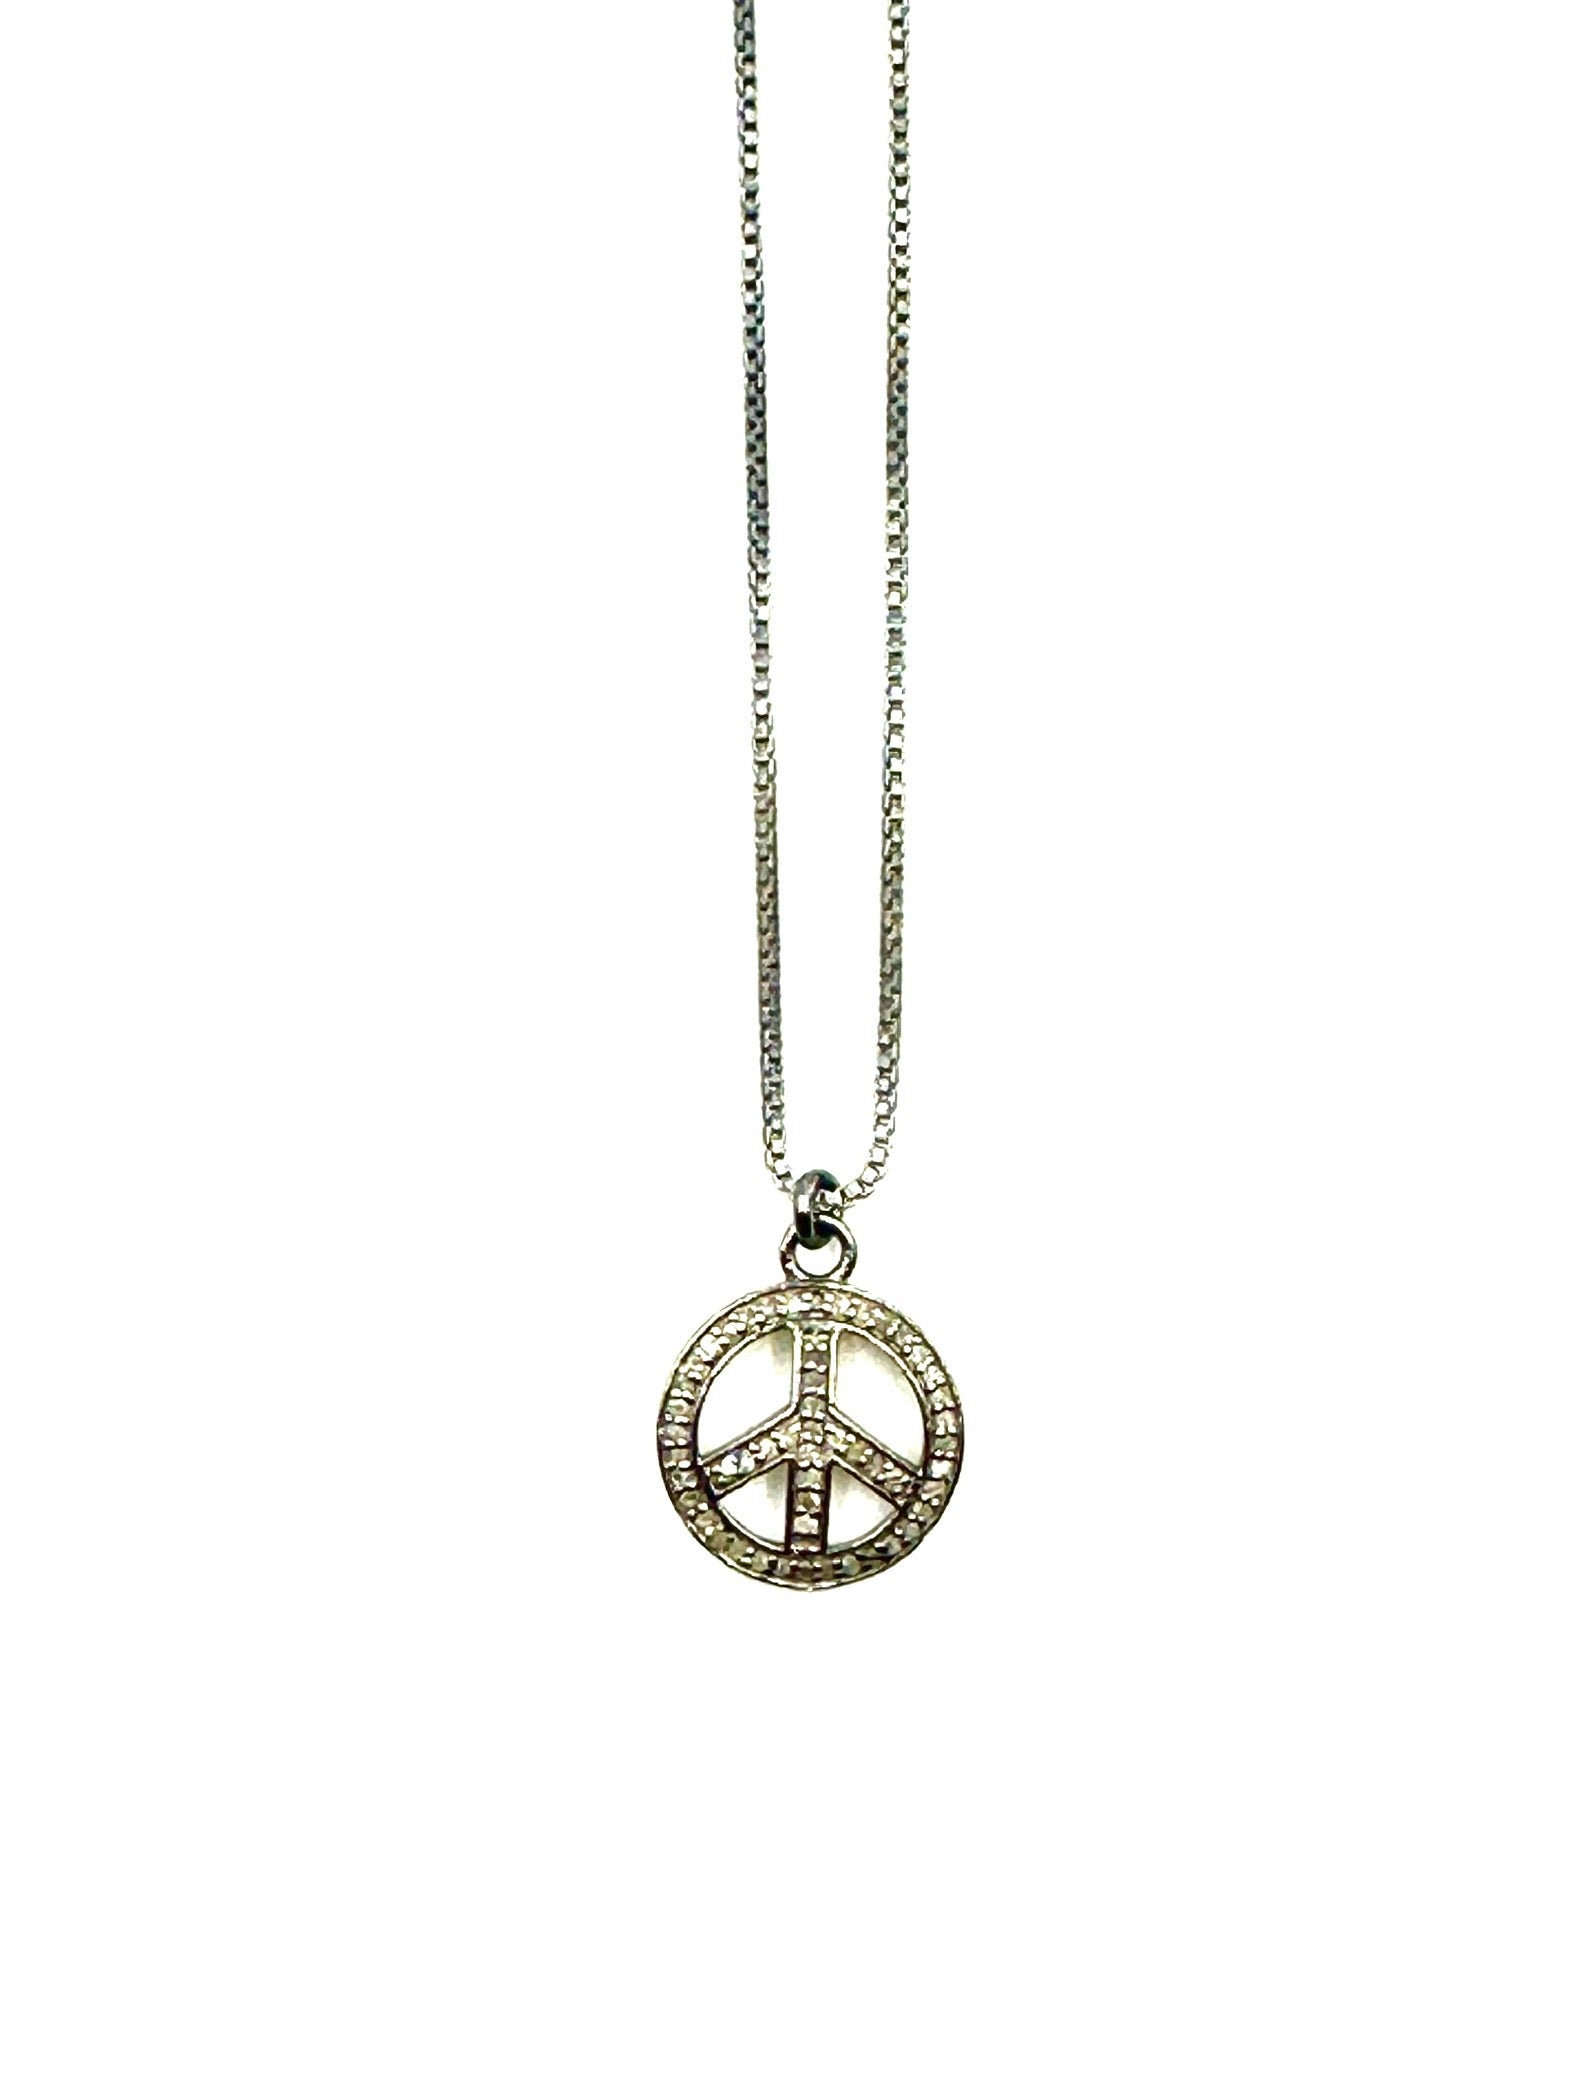 Peace Small - Sterling silver necklace with mini diamond peace charm